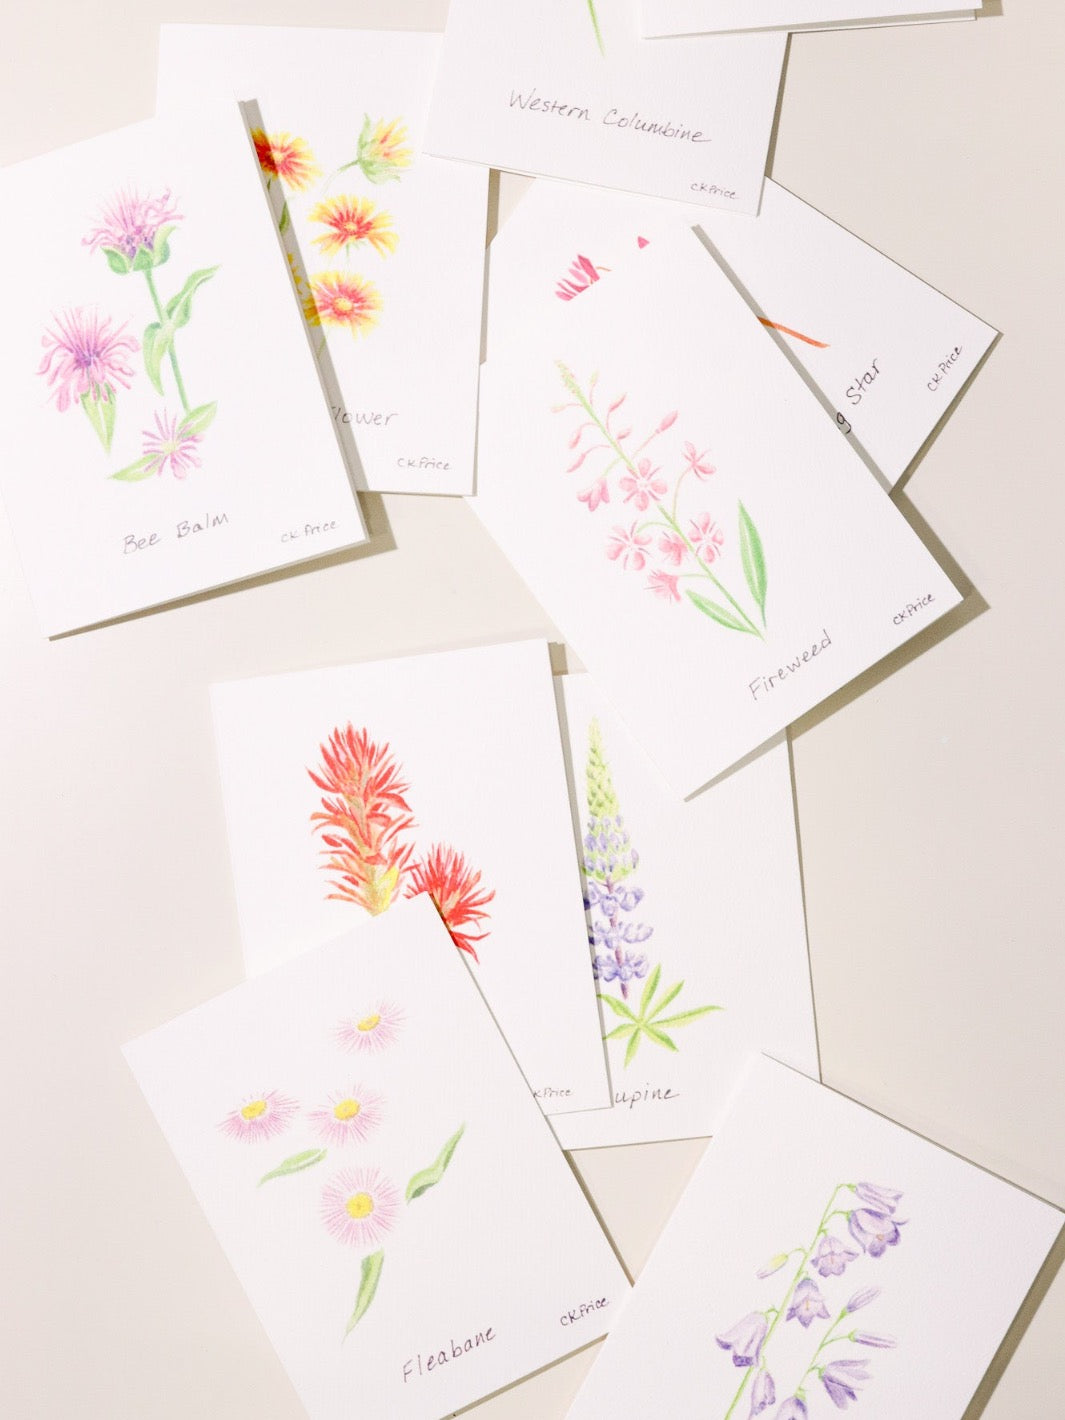 A set of 10 cards with wildflower illustrations and names